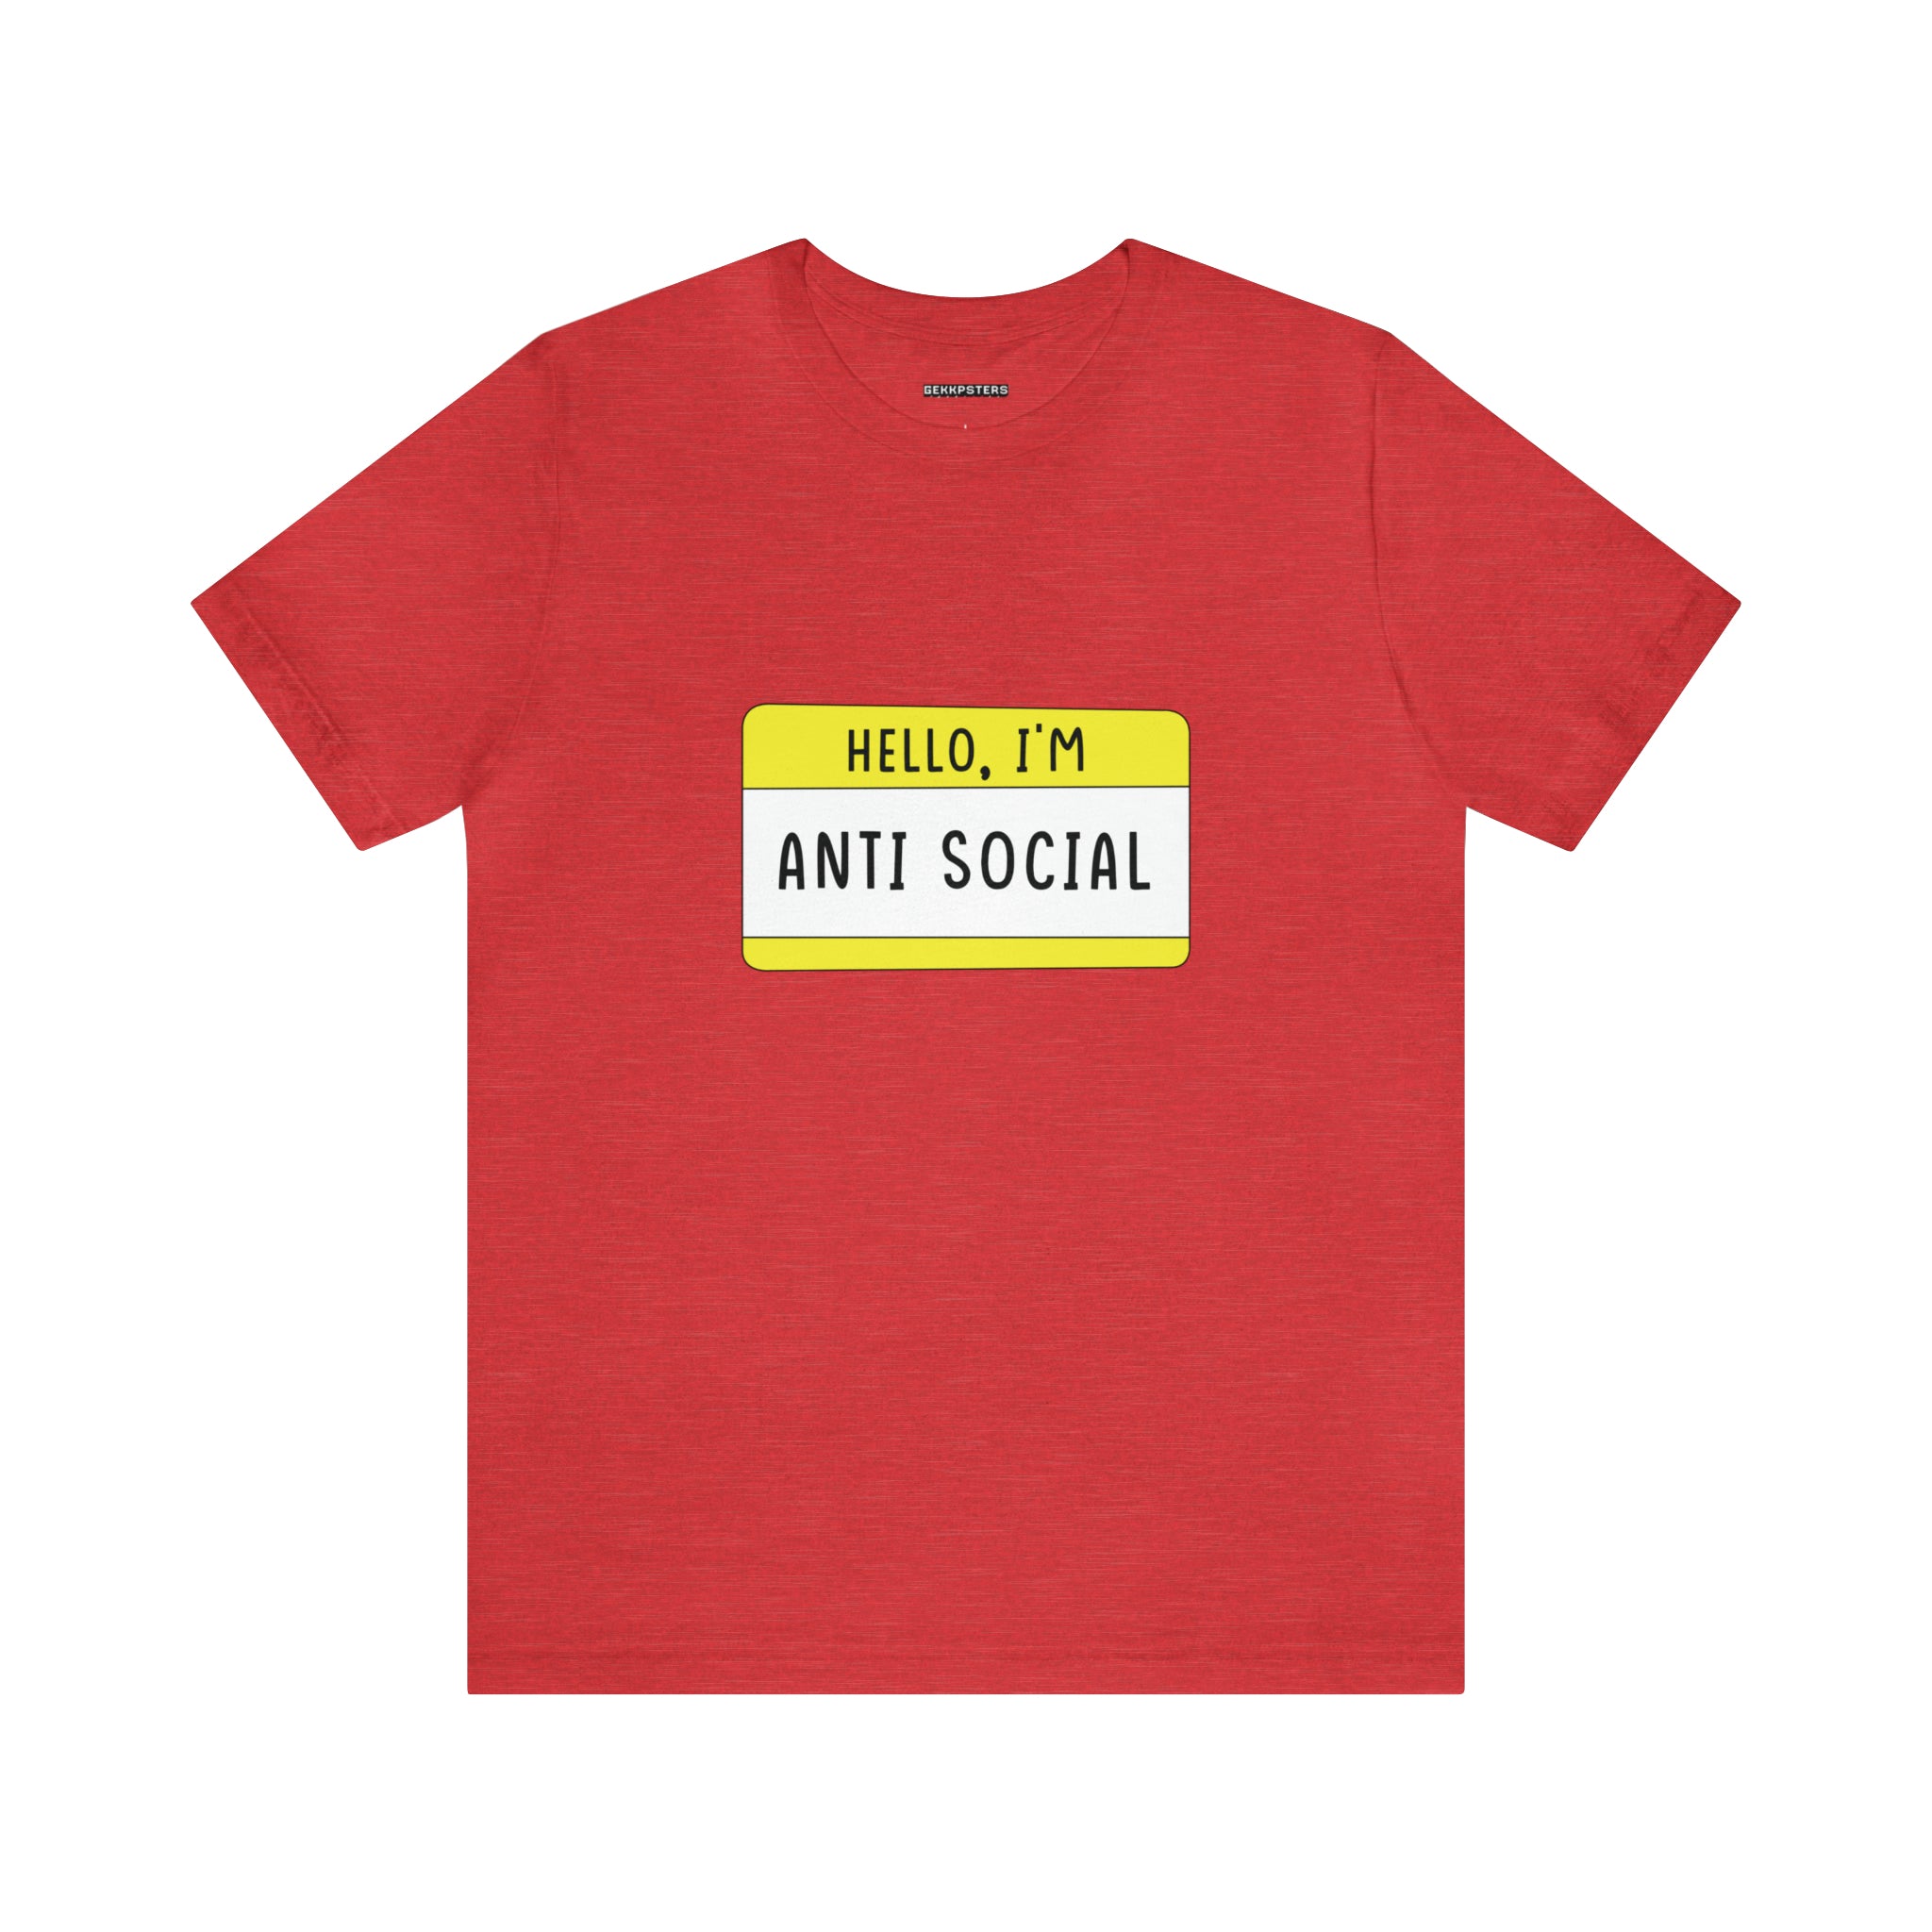 Hello, I'm Anti Social T-Shirt with a yellow name tag graphic that reads "hello, i'm anti-social" on the chest.